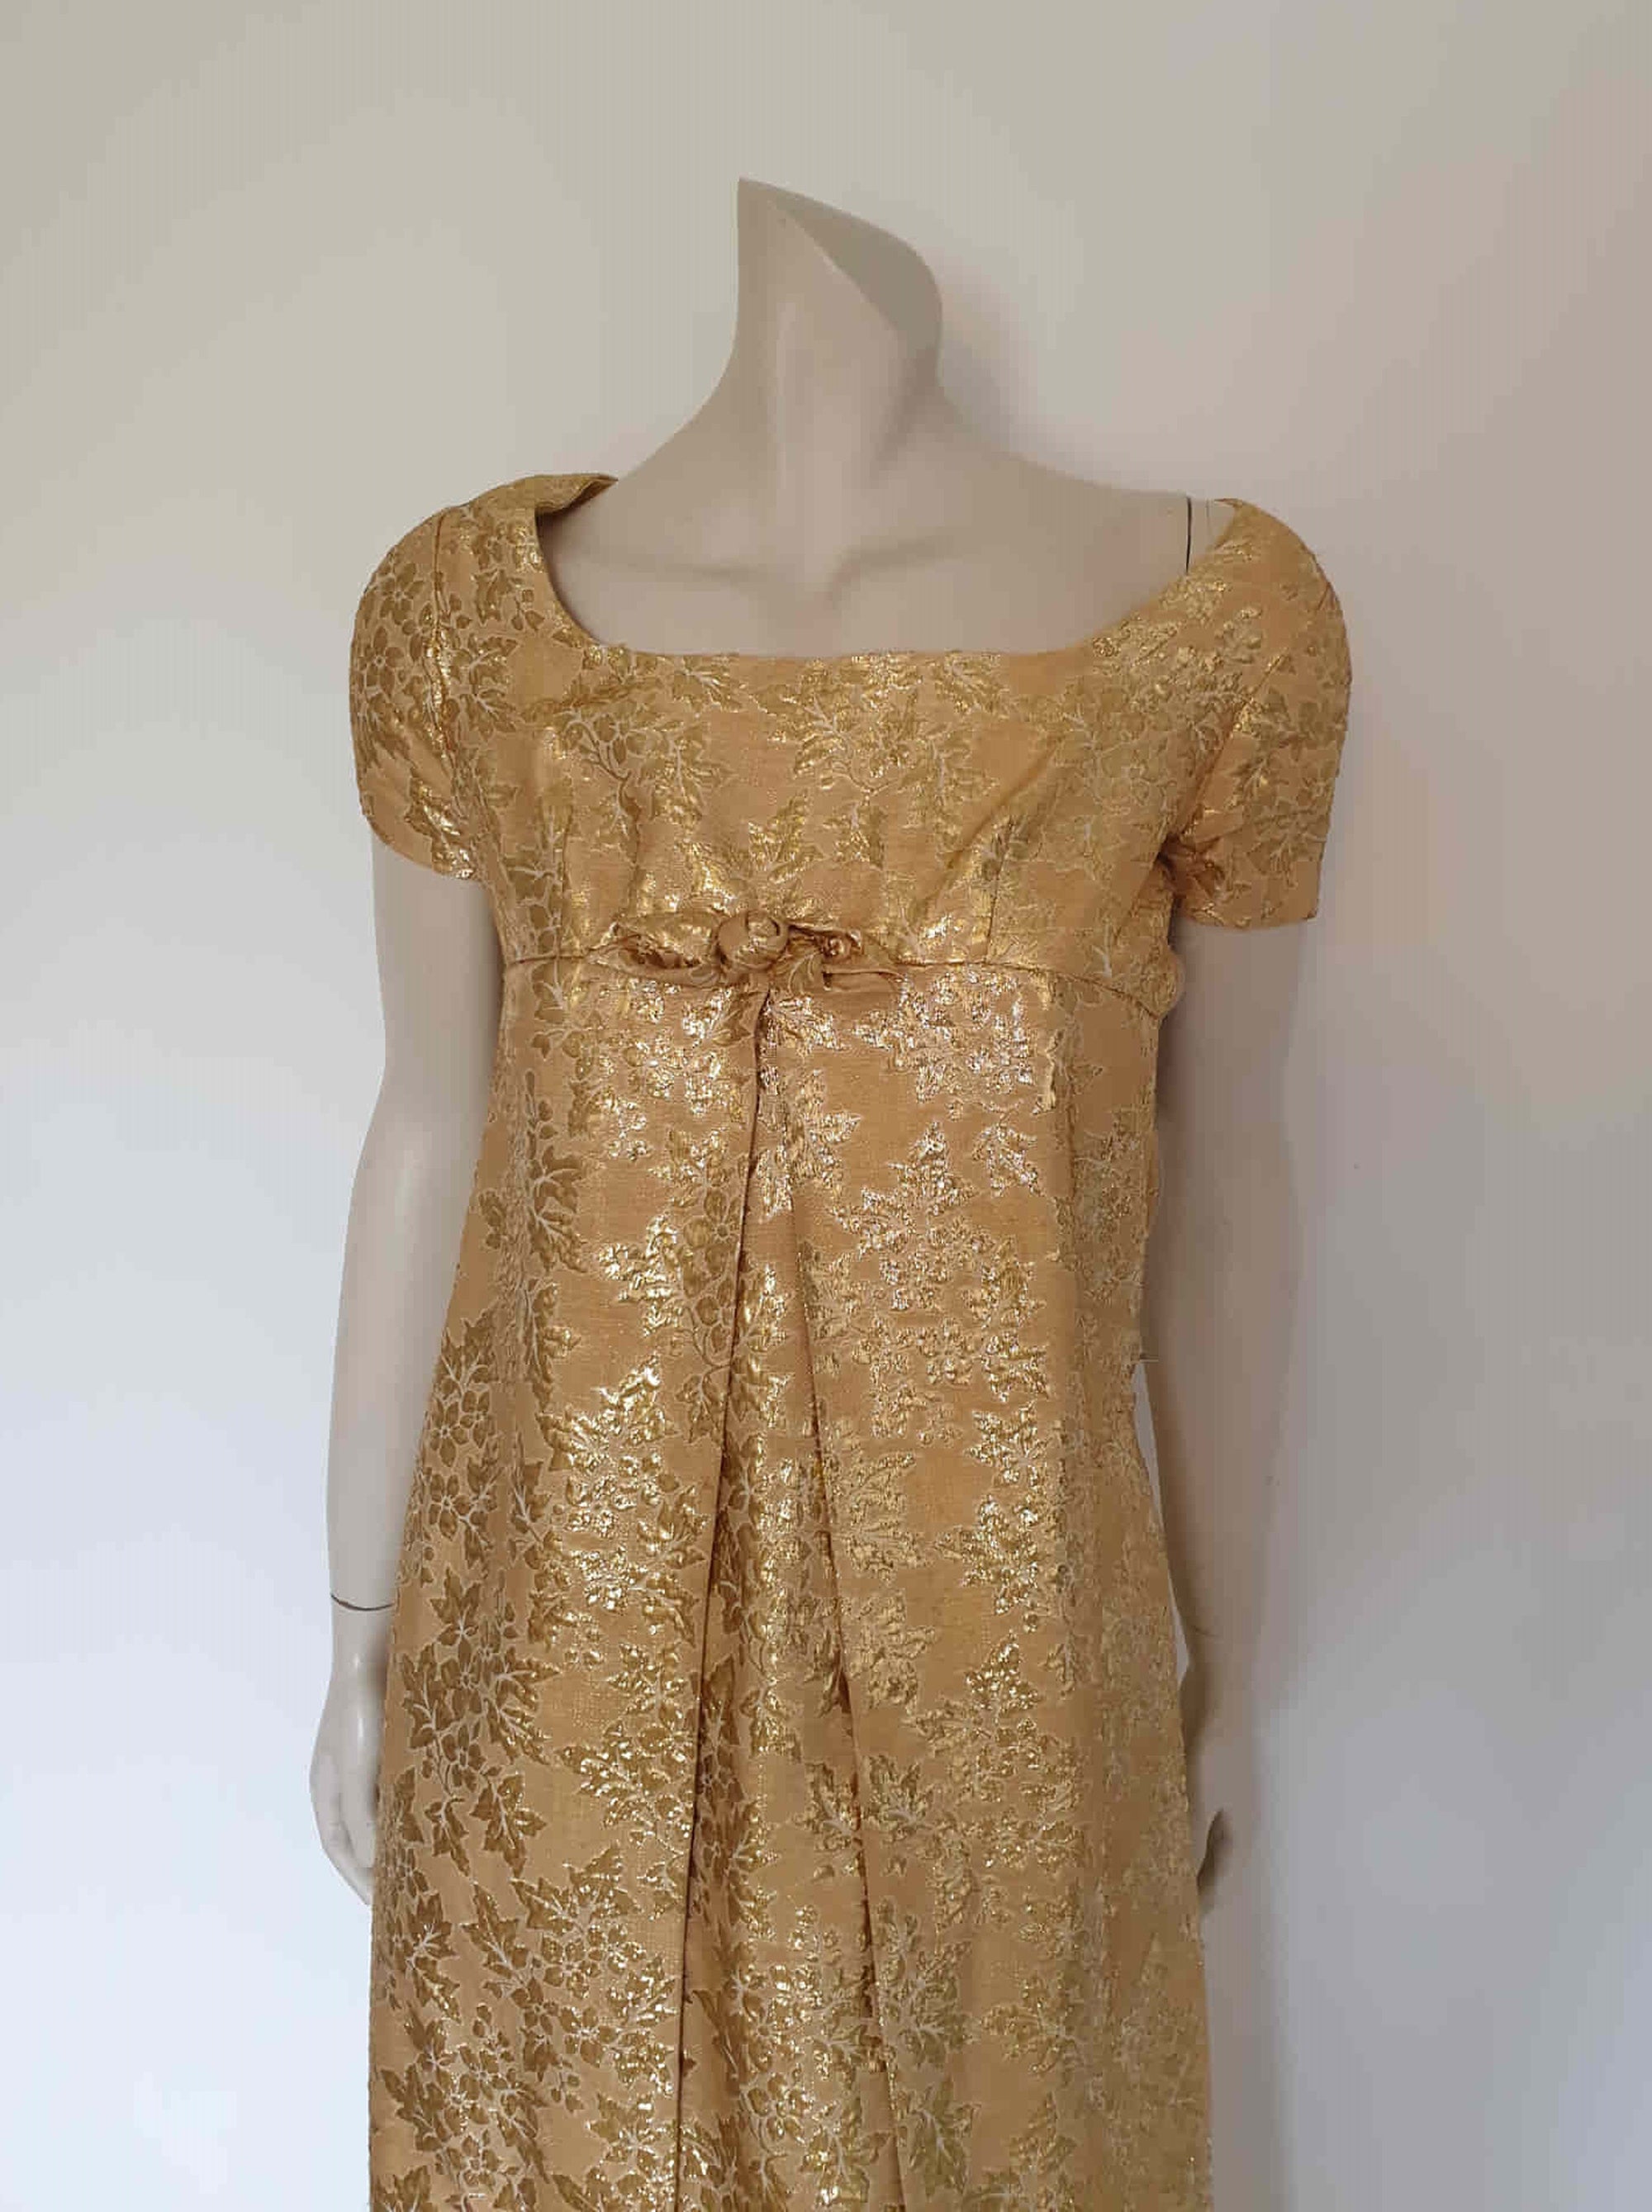 1960s vintage gold brocade evening gown Small 